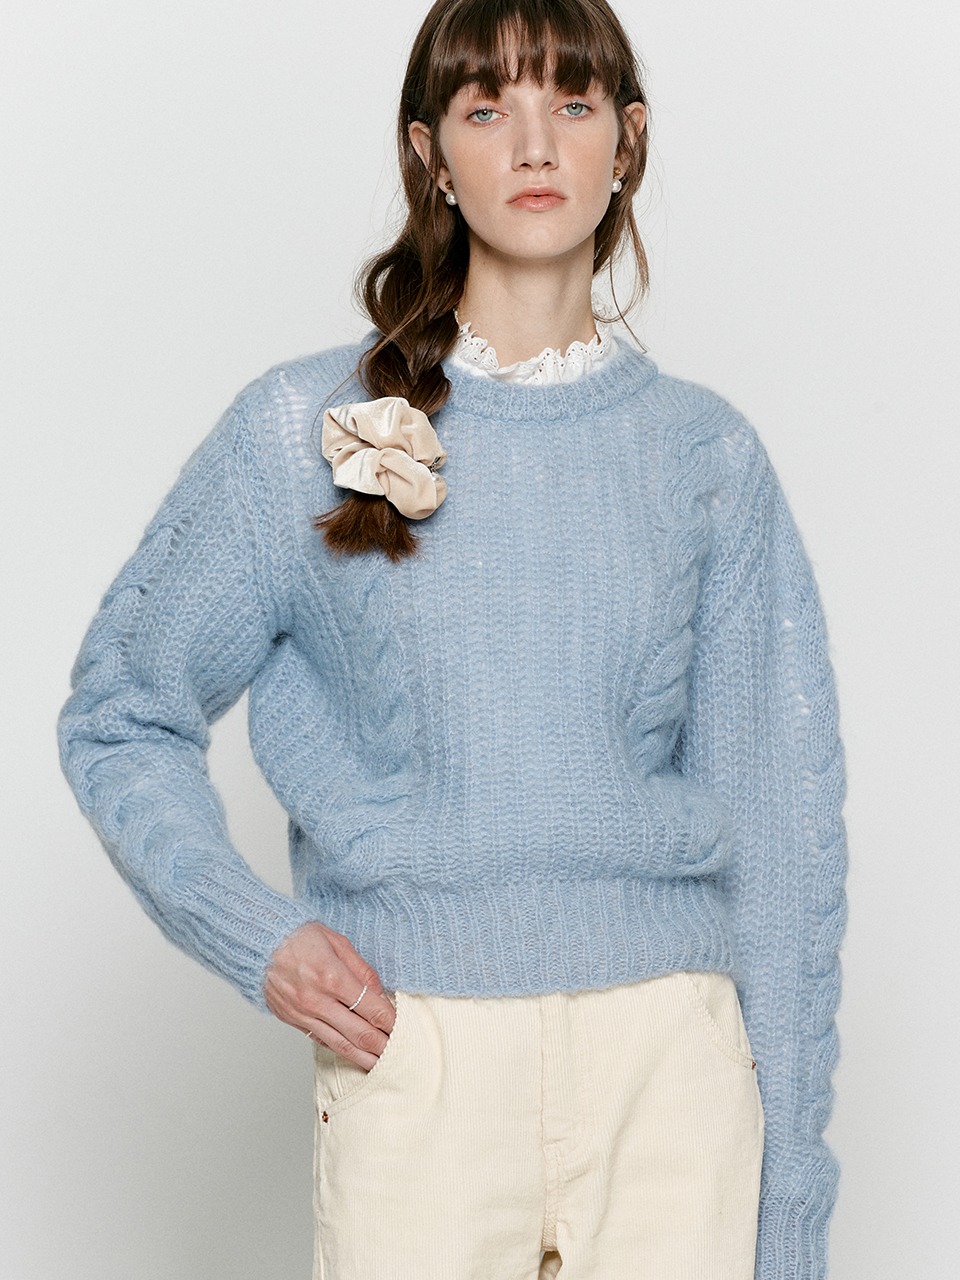 Mohair cable knit - Dusty blue